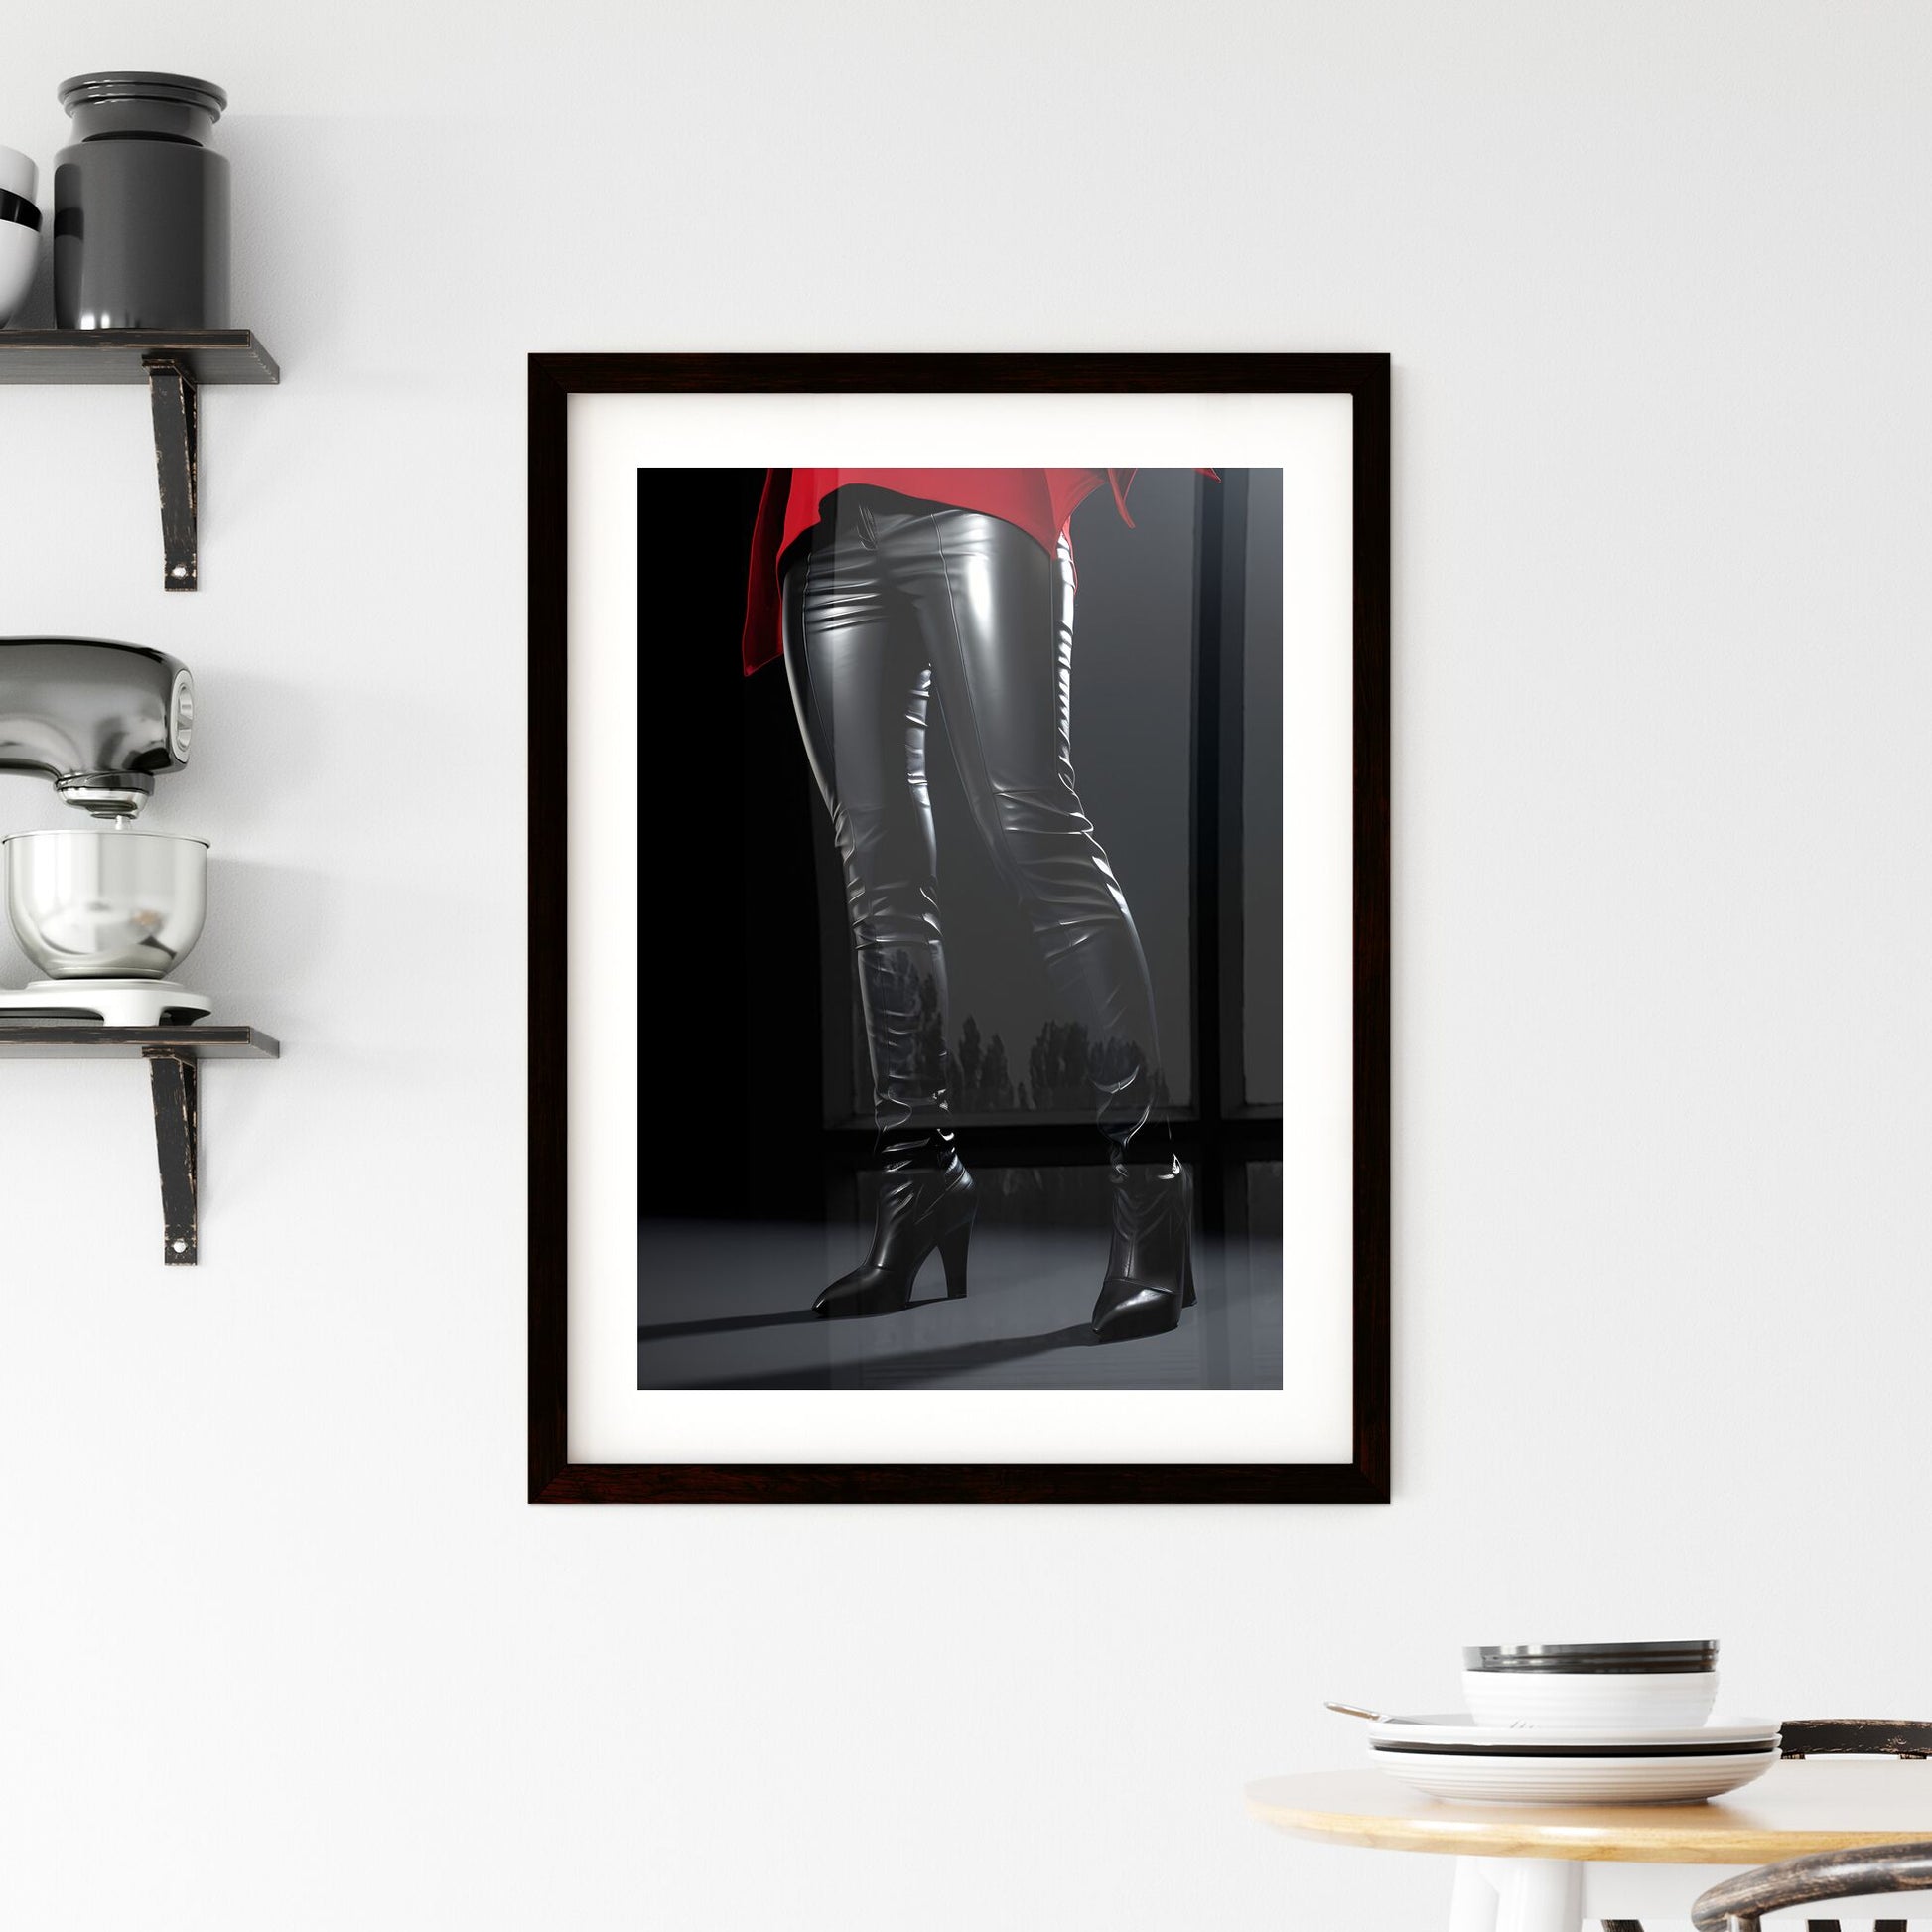 A Poster of female black skintight leather pants hips - A Woman Wearing  Black Leather Pants And Red Tie